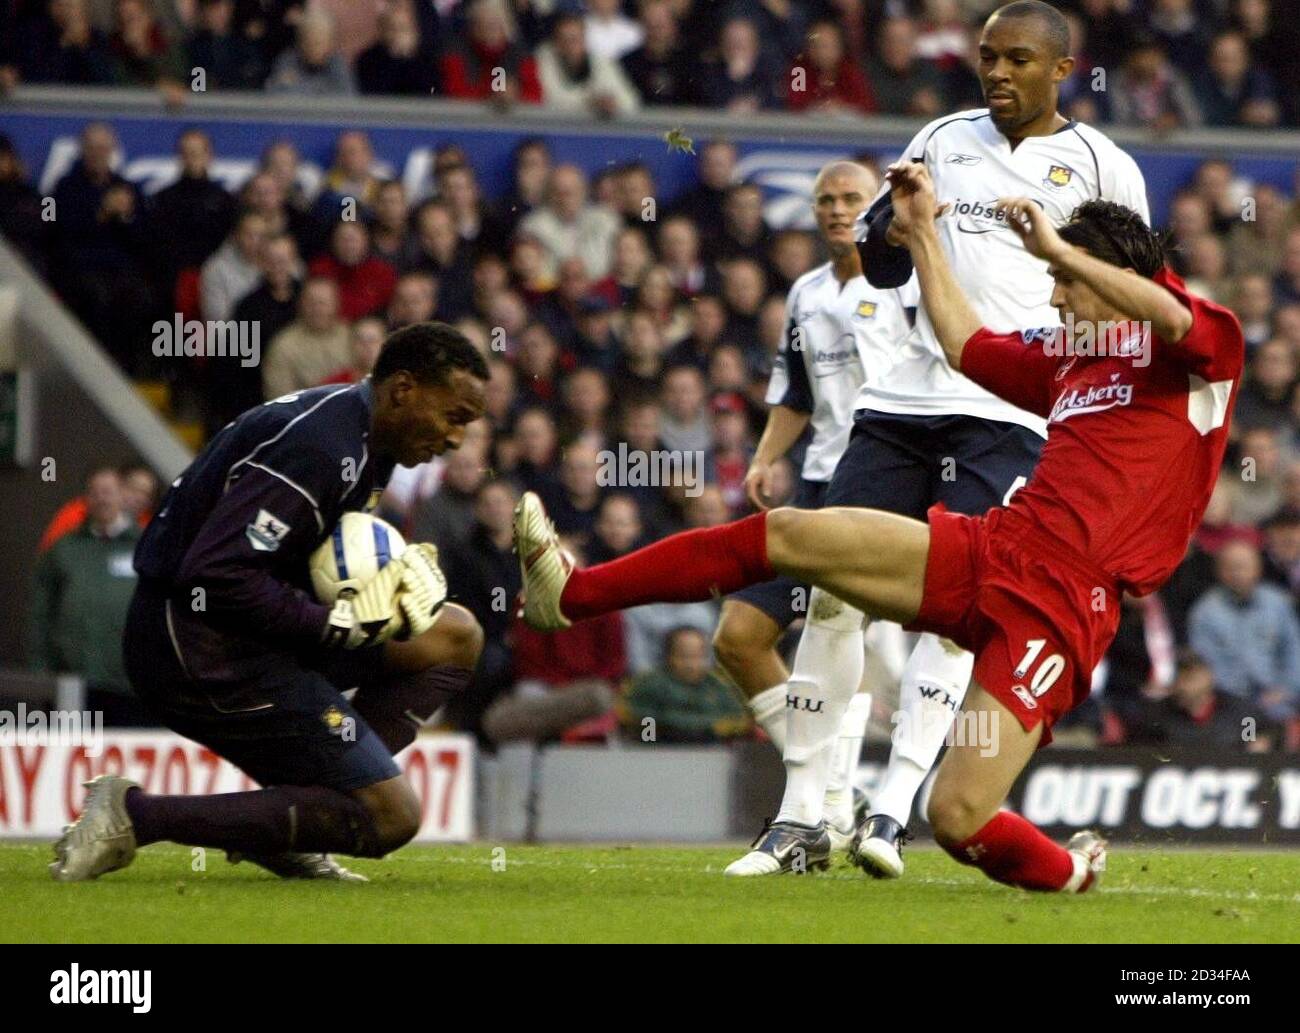 Liverpool's Luis Garcia (R) challenges Shaka Hislop of West Ham United for the ball during the Barclays Premiership match at Anfield, Liverpool, Saturday October 29, 2005. PRESS ASSOCIATION Photo. Photo credit should read: Phil Noble/PA. Stock Photo